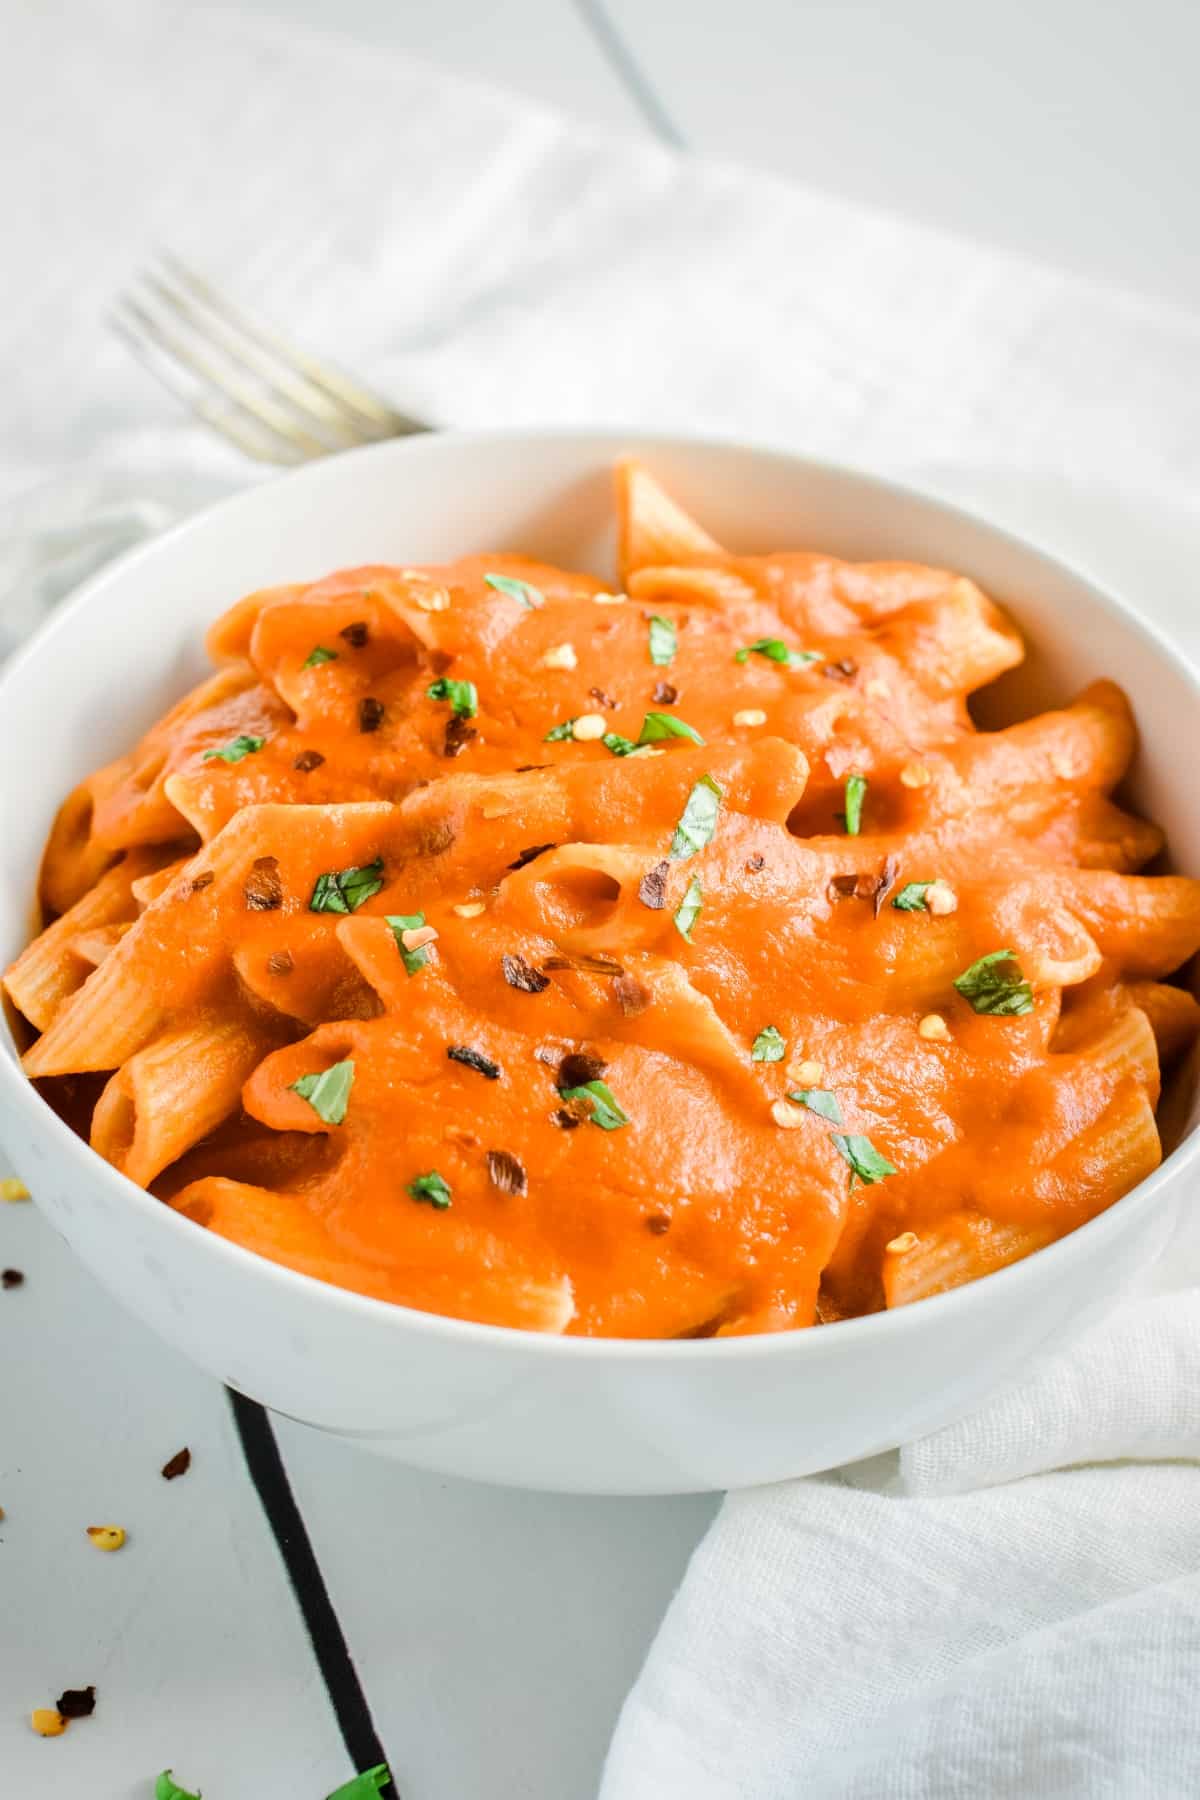 Vodka sauce over pasta in a bowl.